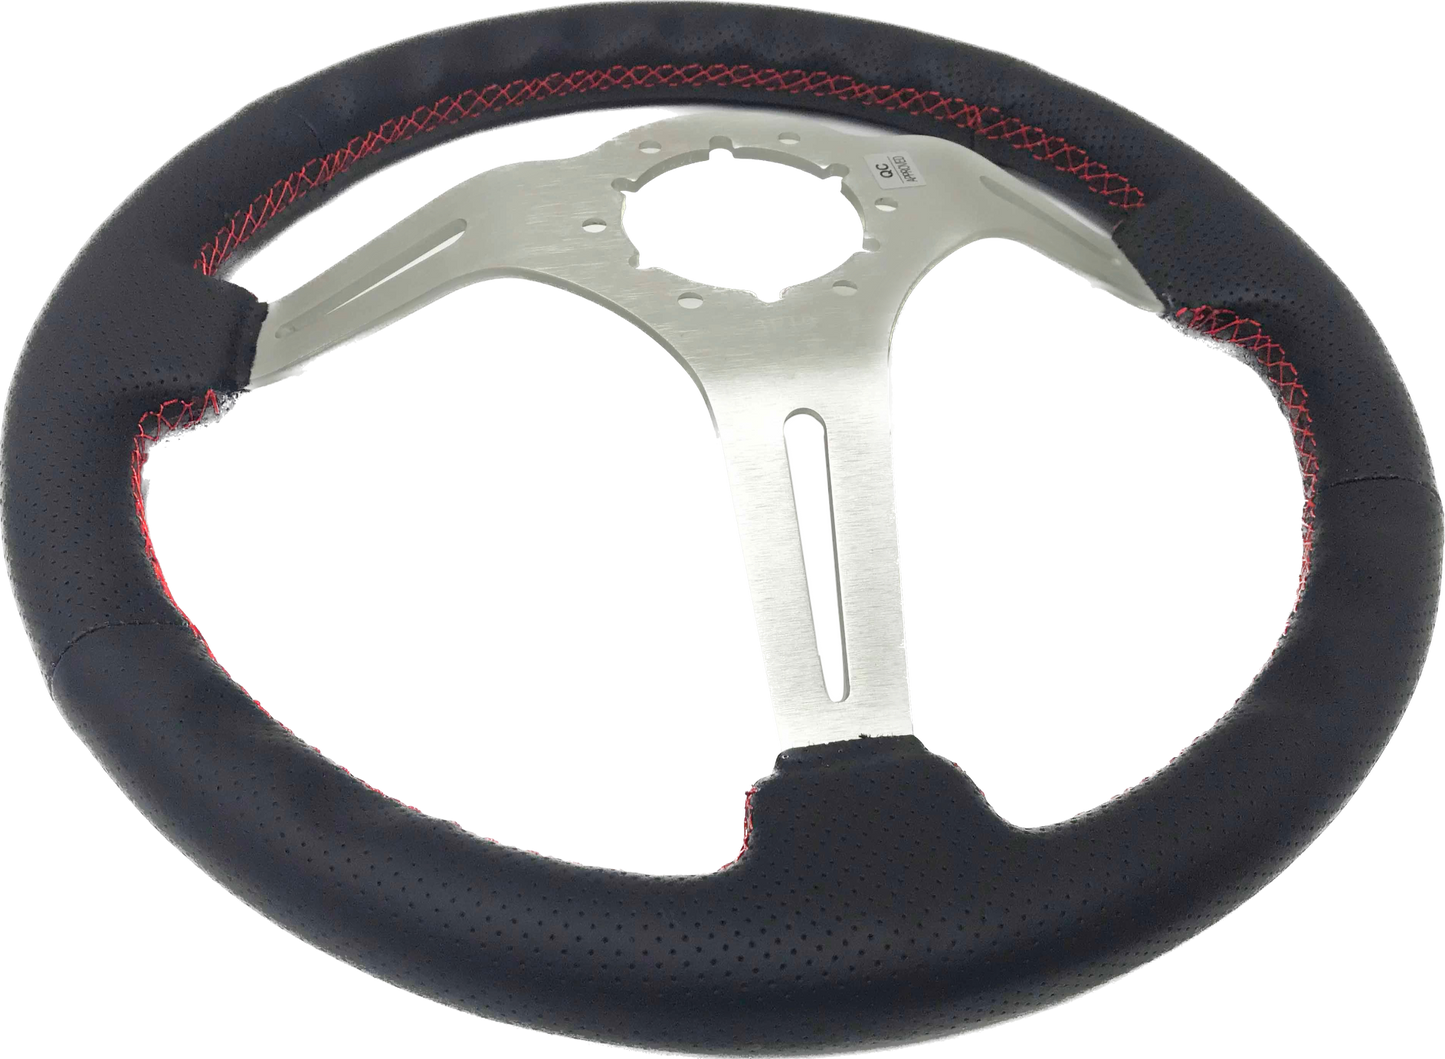 1965-68, 70-77 Ford Truck Steering Wheel Kit | Perforated Leather | ST3587BLK-RED